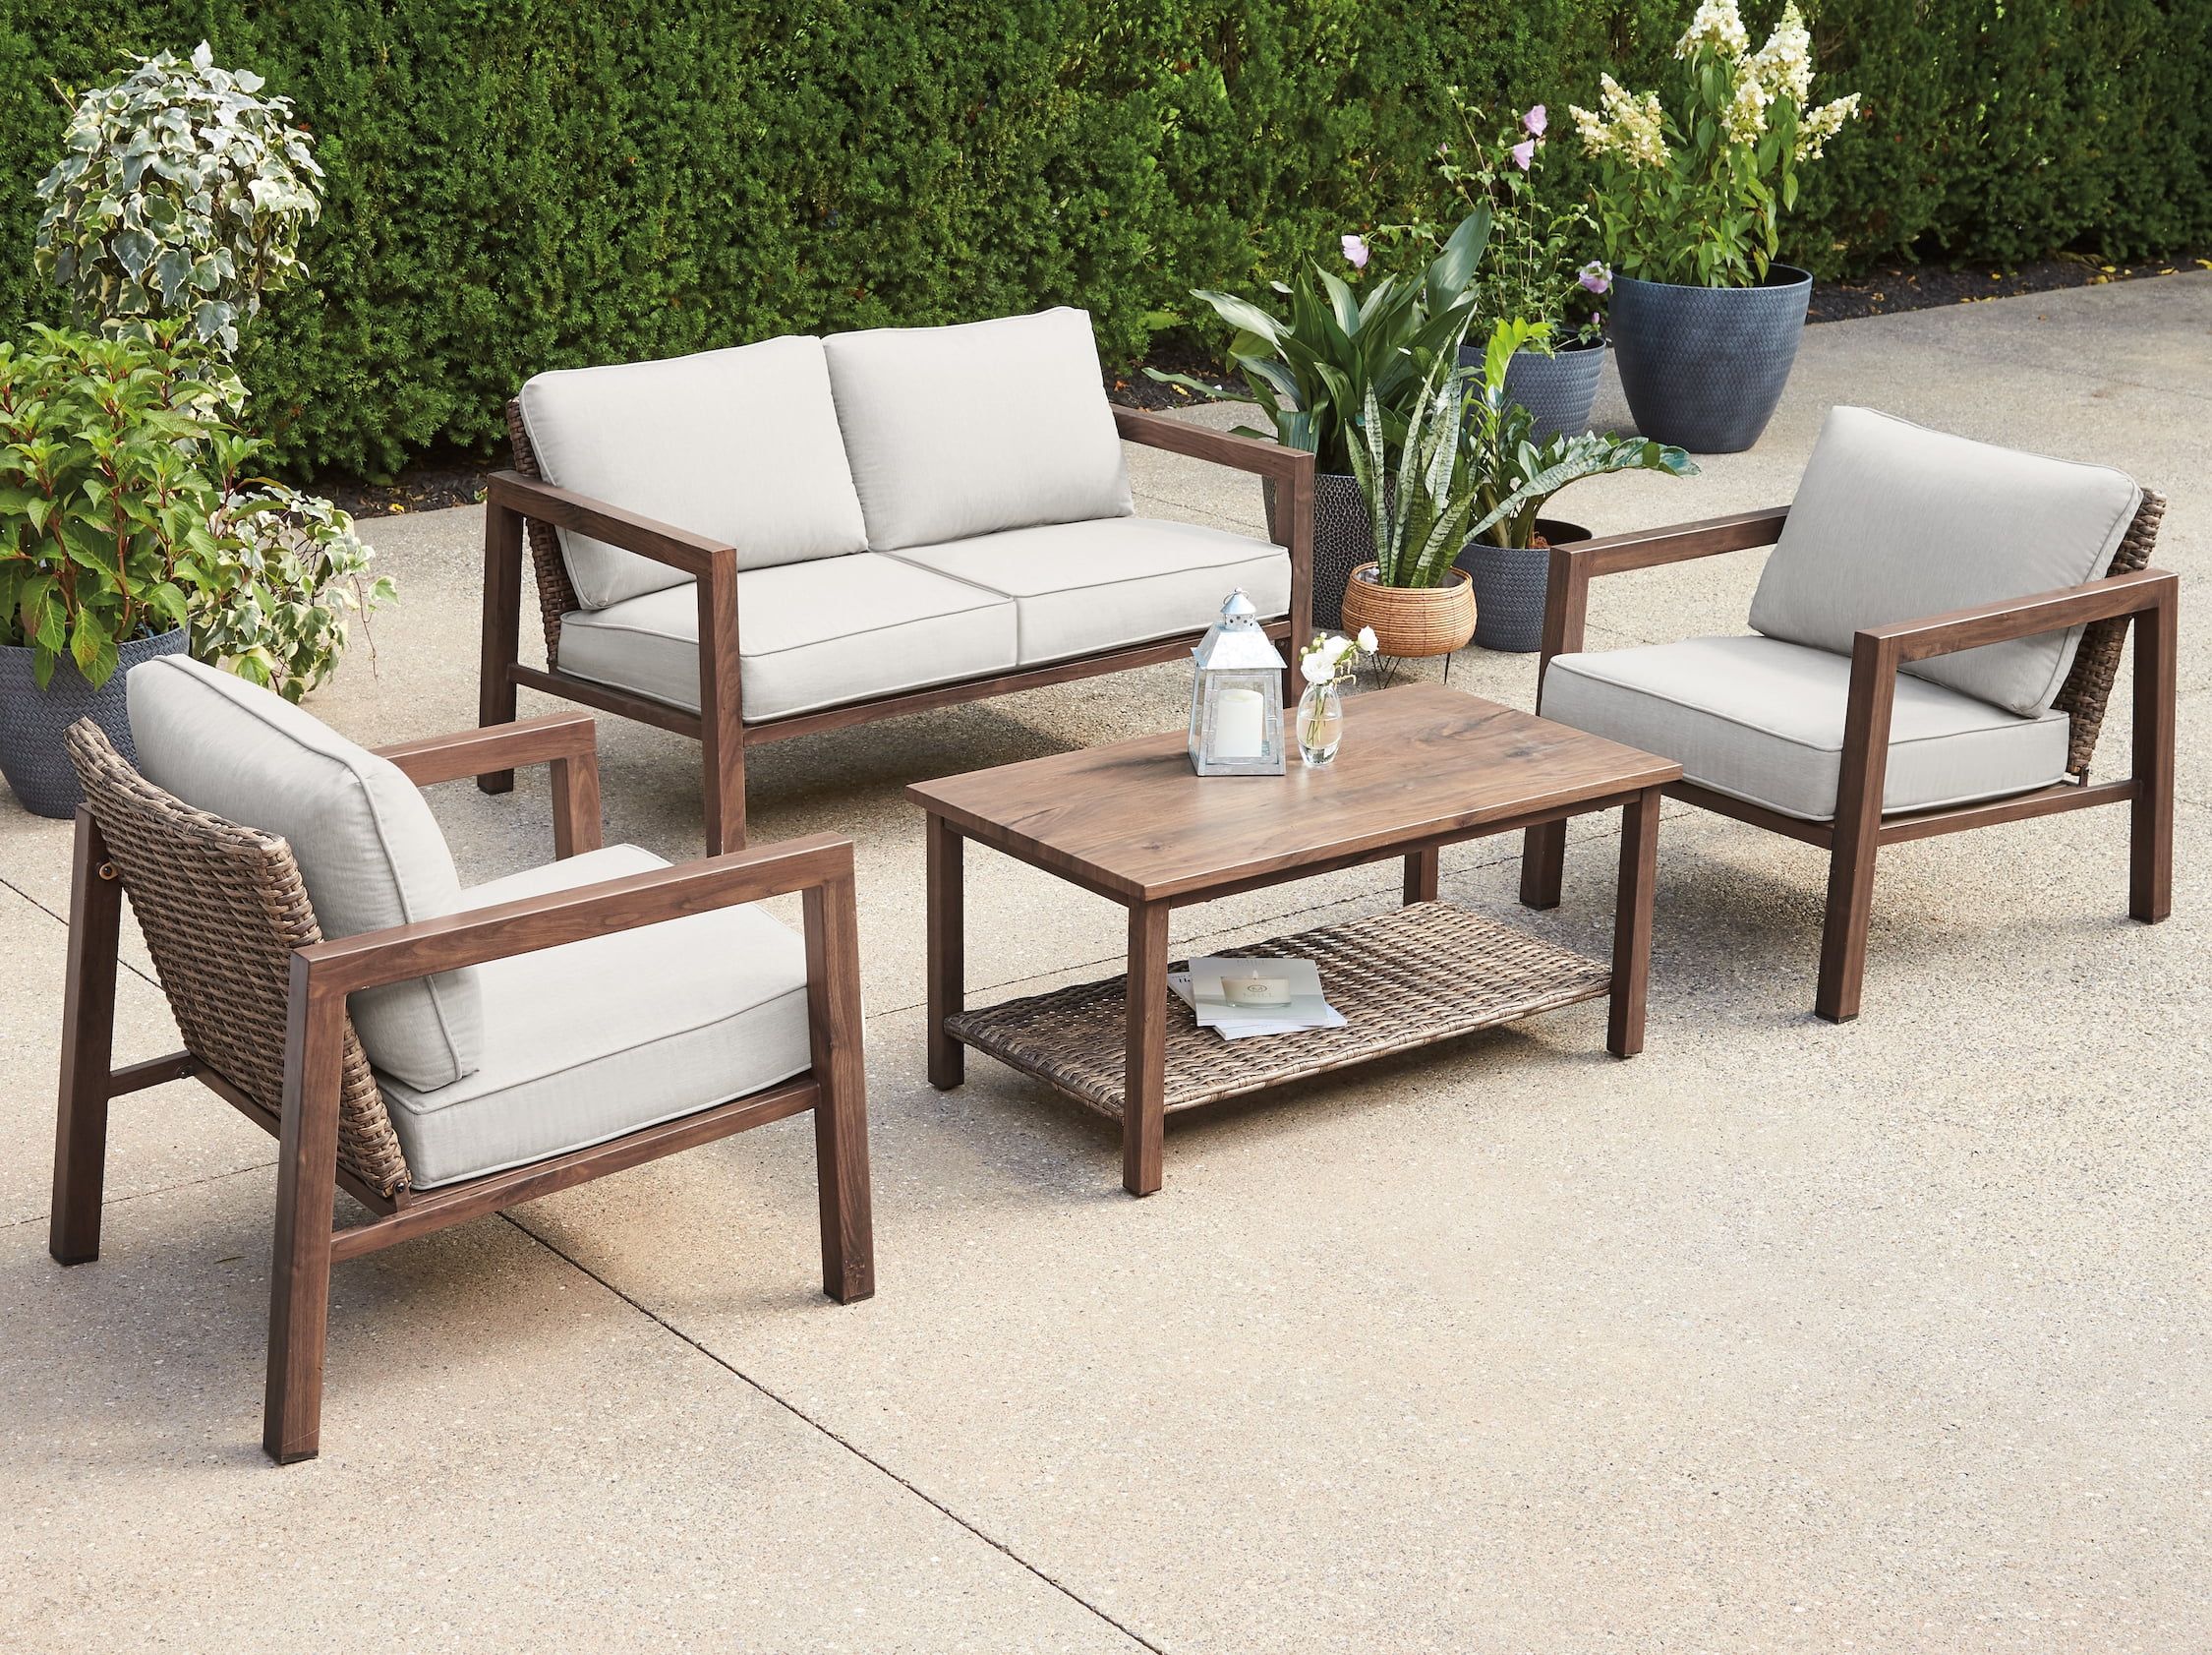 Better Homes & Gardens Willow Springs 4-Piece Outdoor Chat Set, Brown and Tan | Walmart (US)